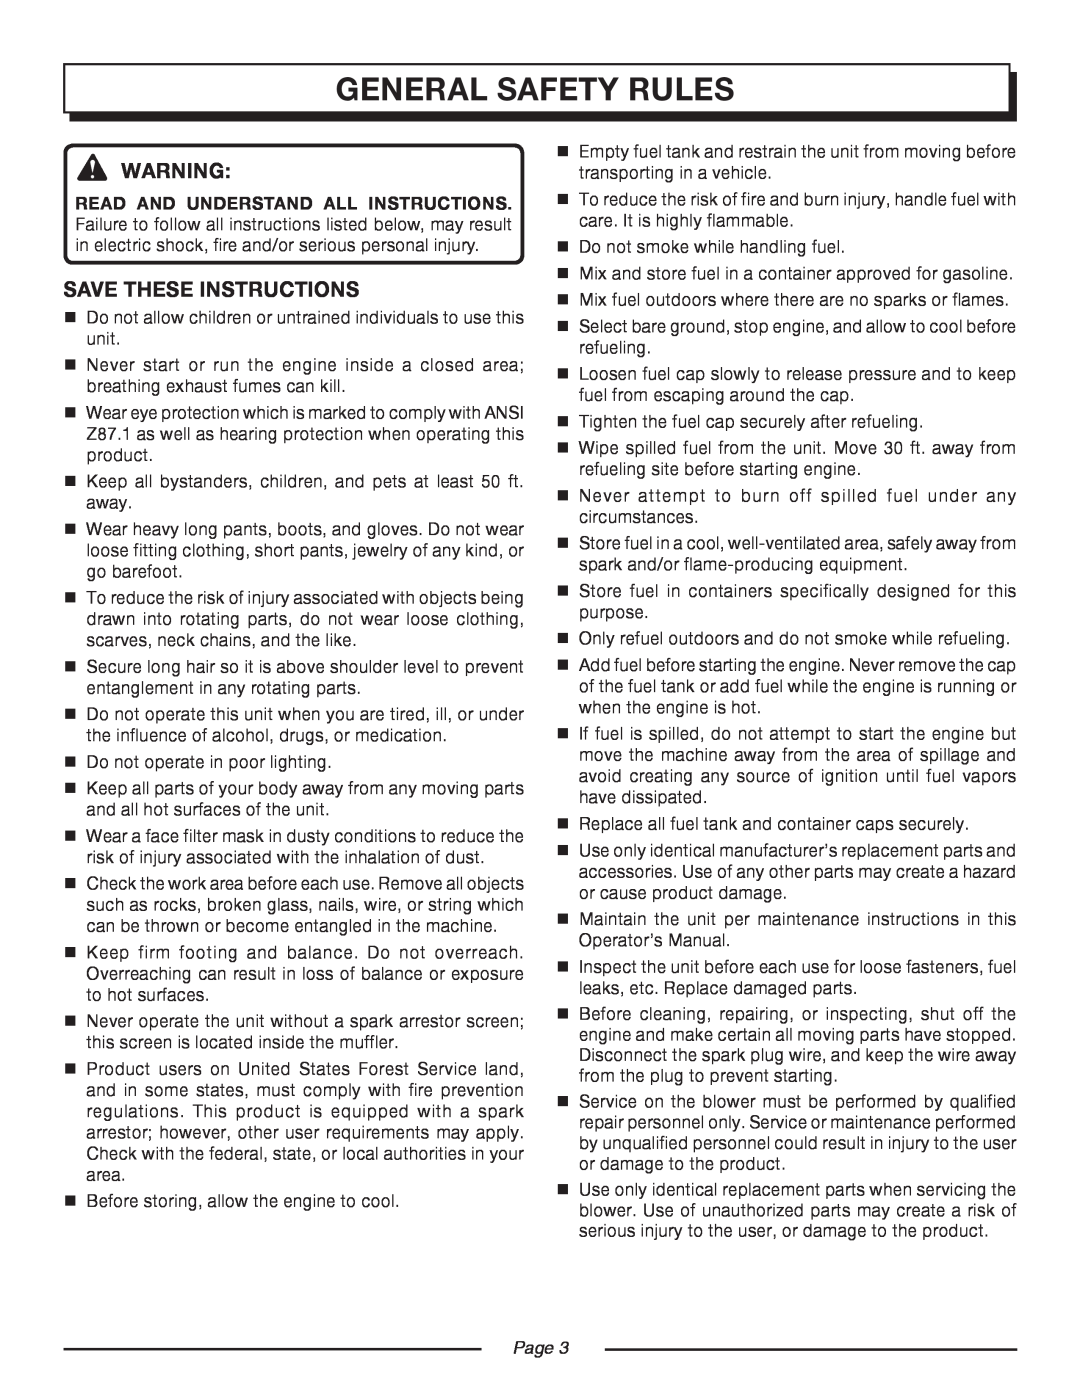 Homelite UT08580, UT08981 manual general safety rules, Save These Instructions, Page  